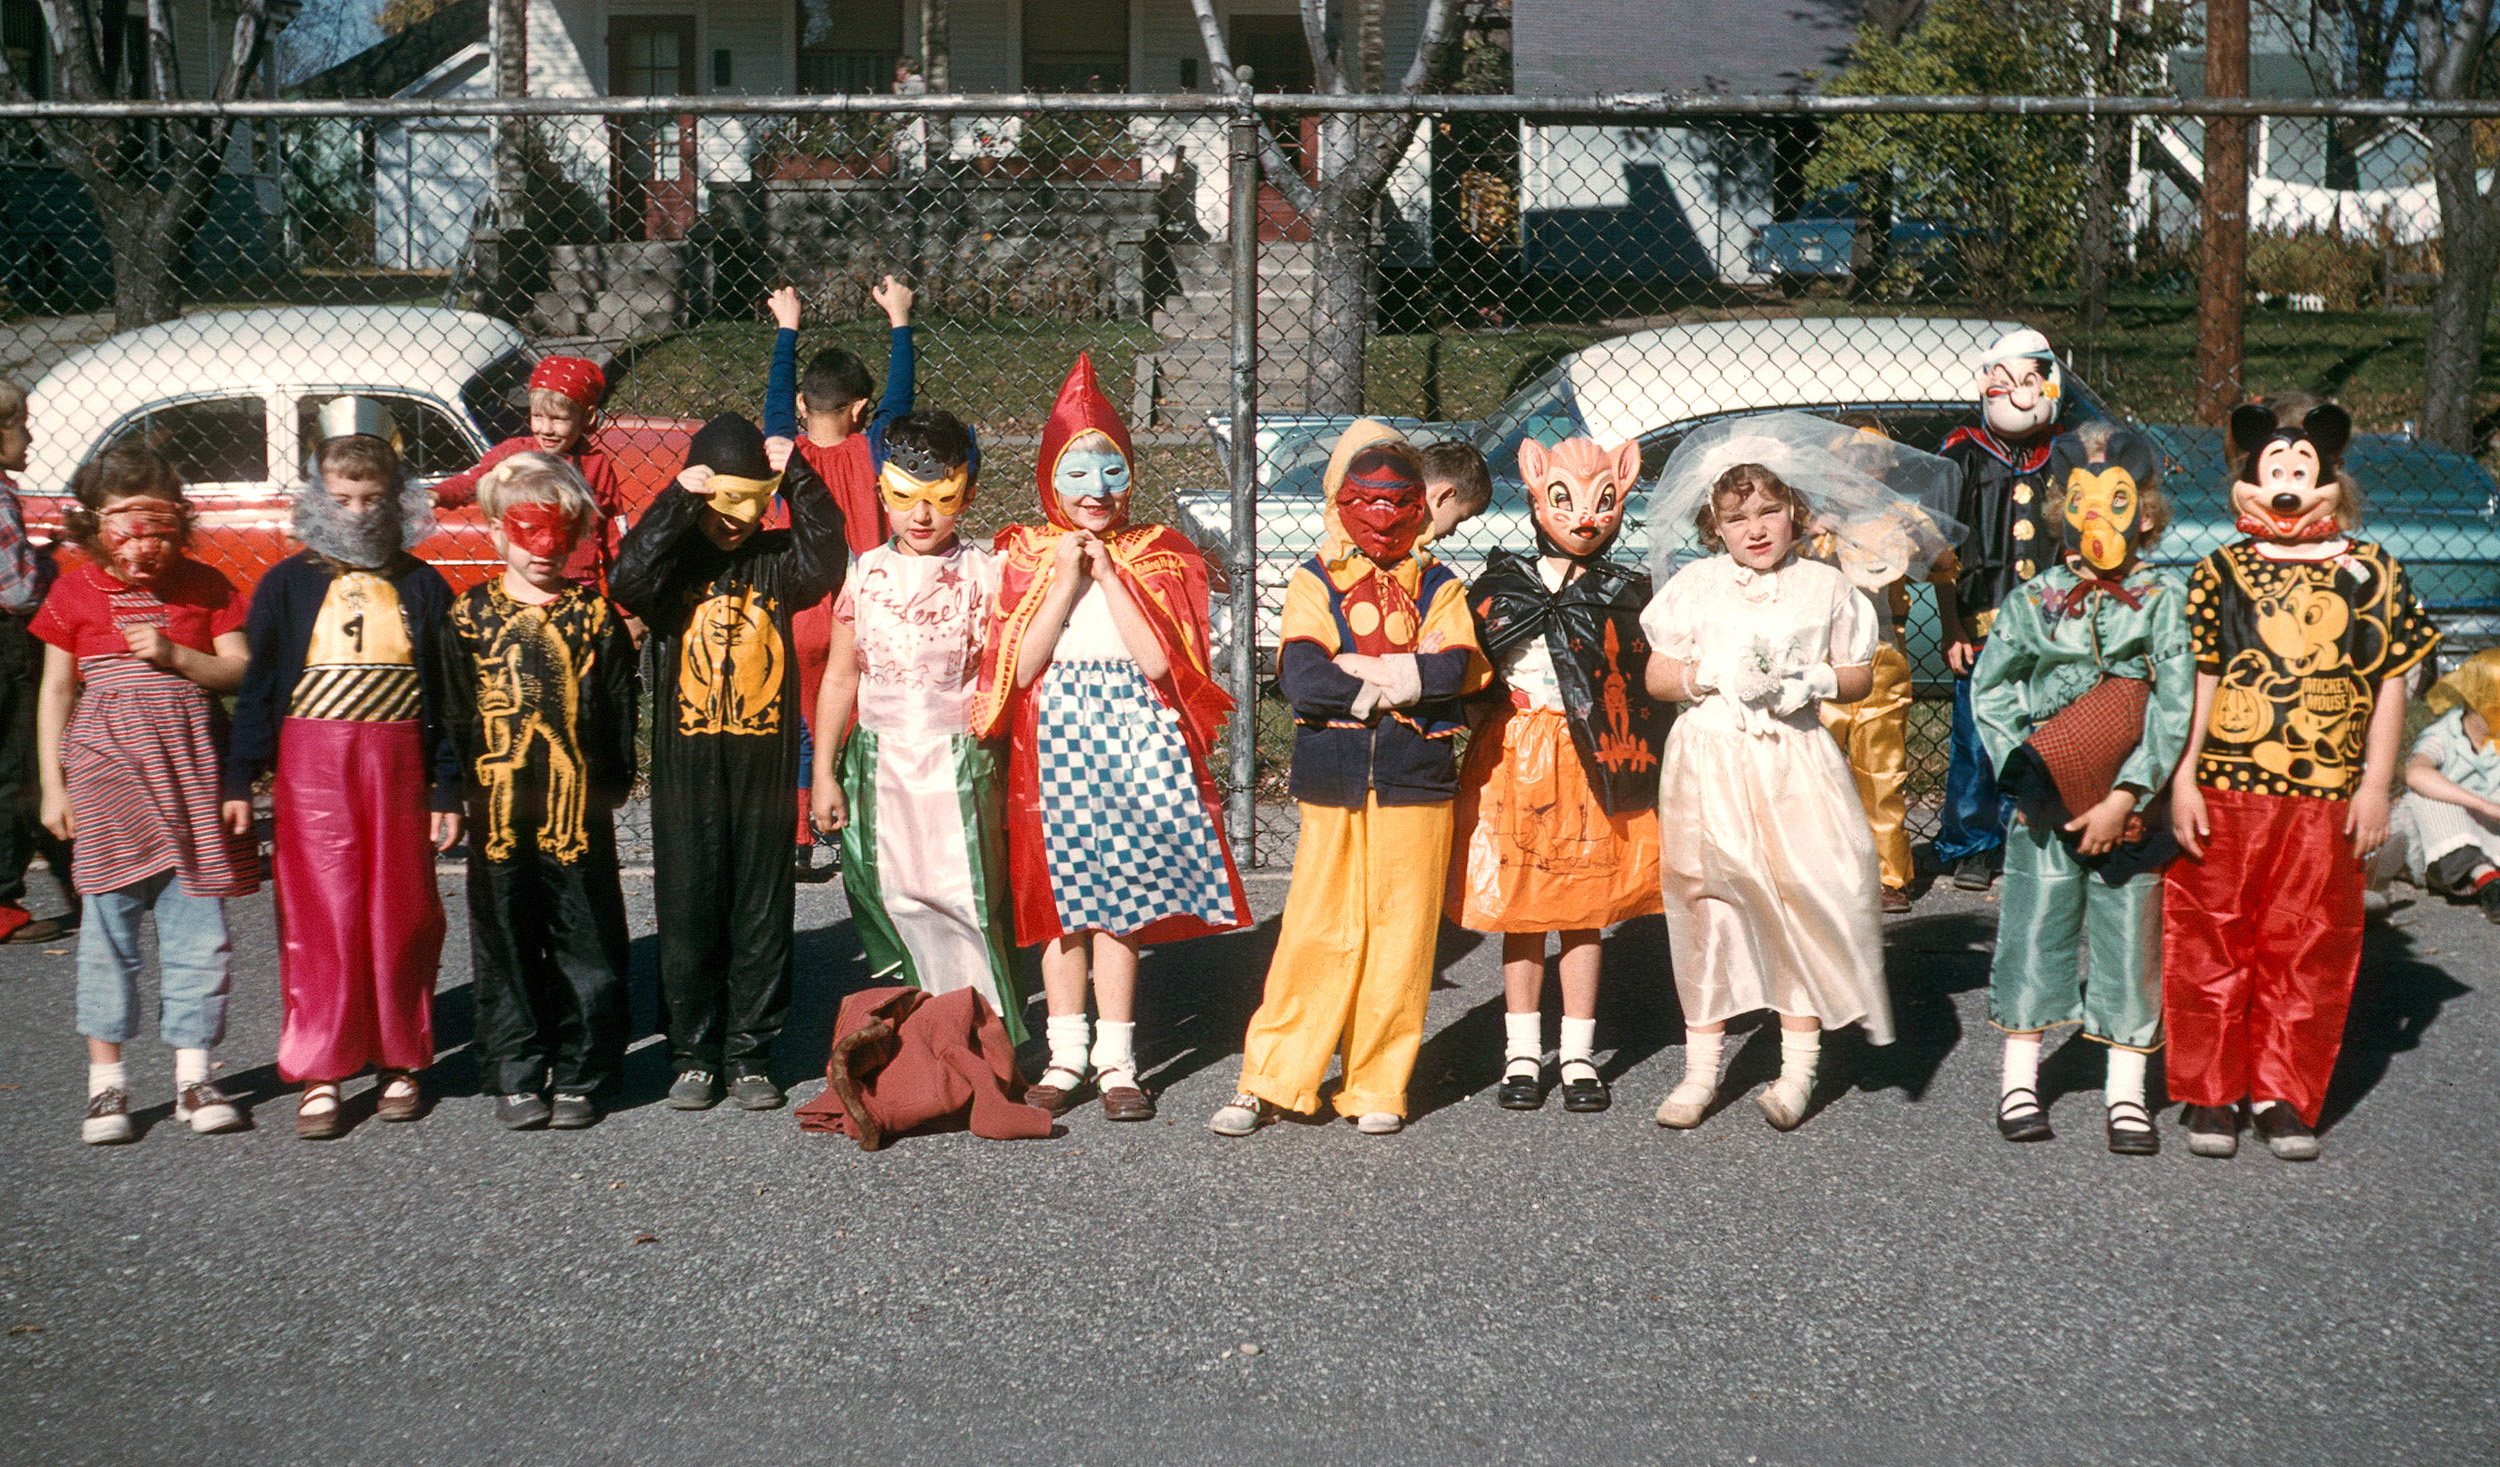 Kodachrome taken by a school teacher of her class in Michigan 1958. Collection of Joe Geronimo. View full size.